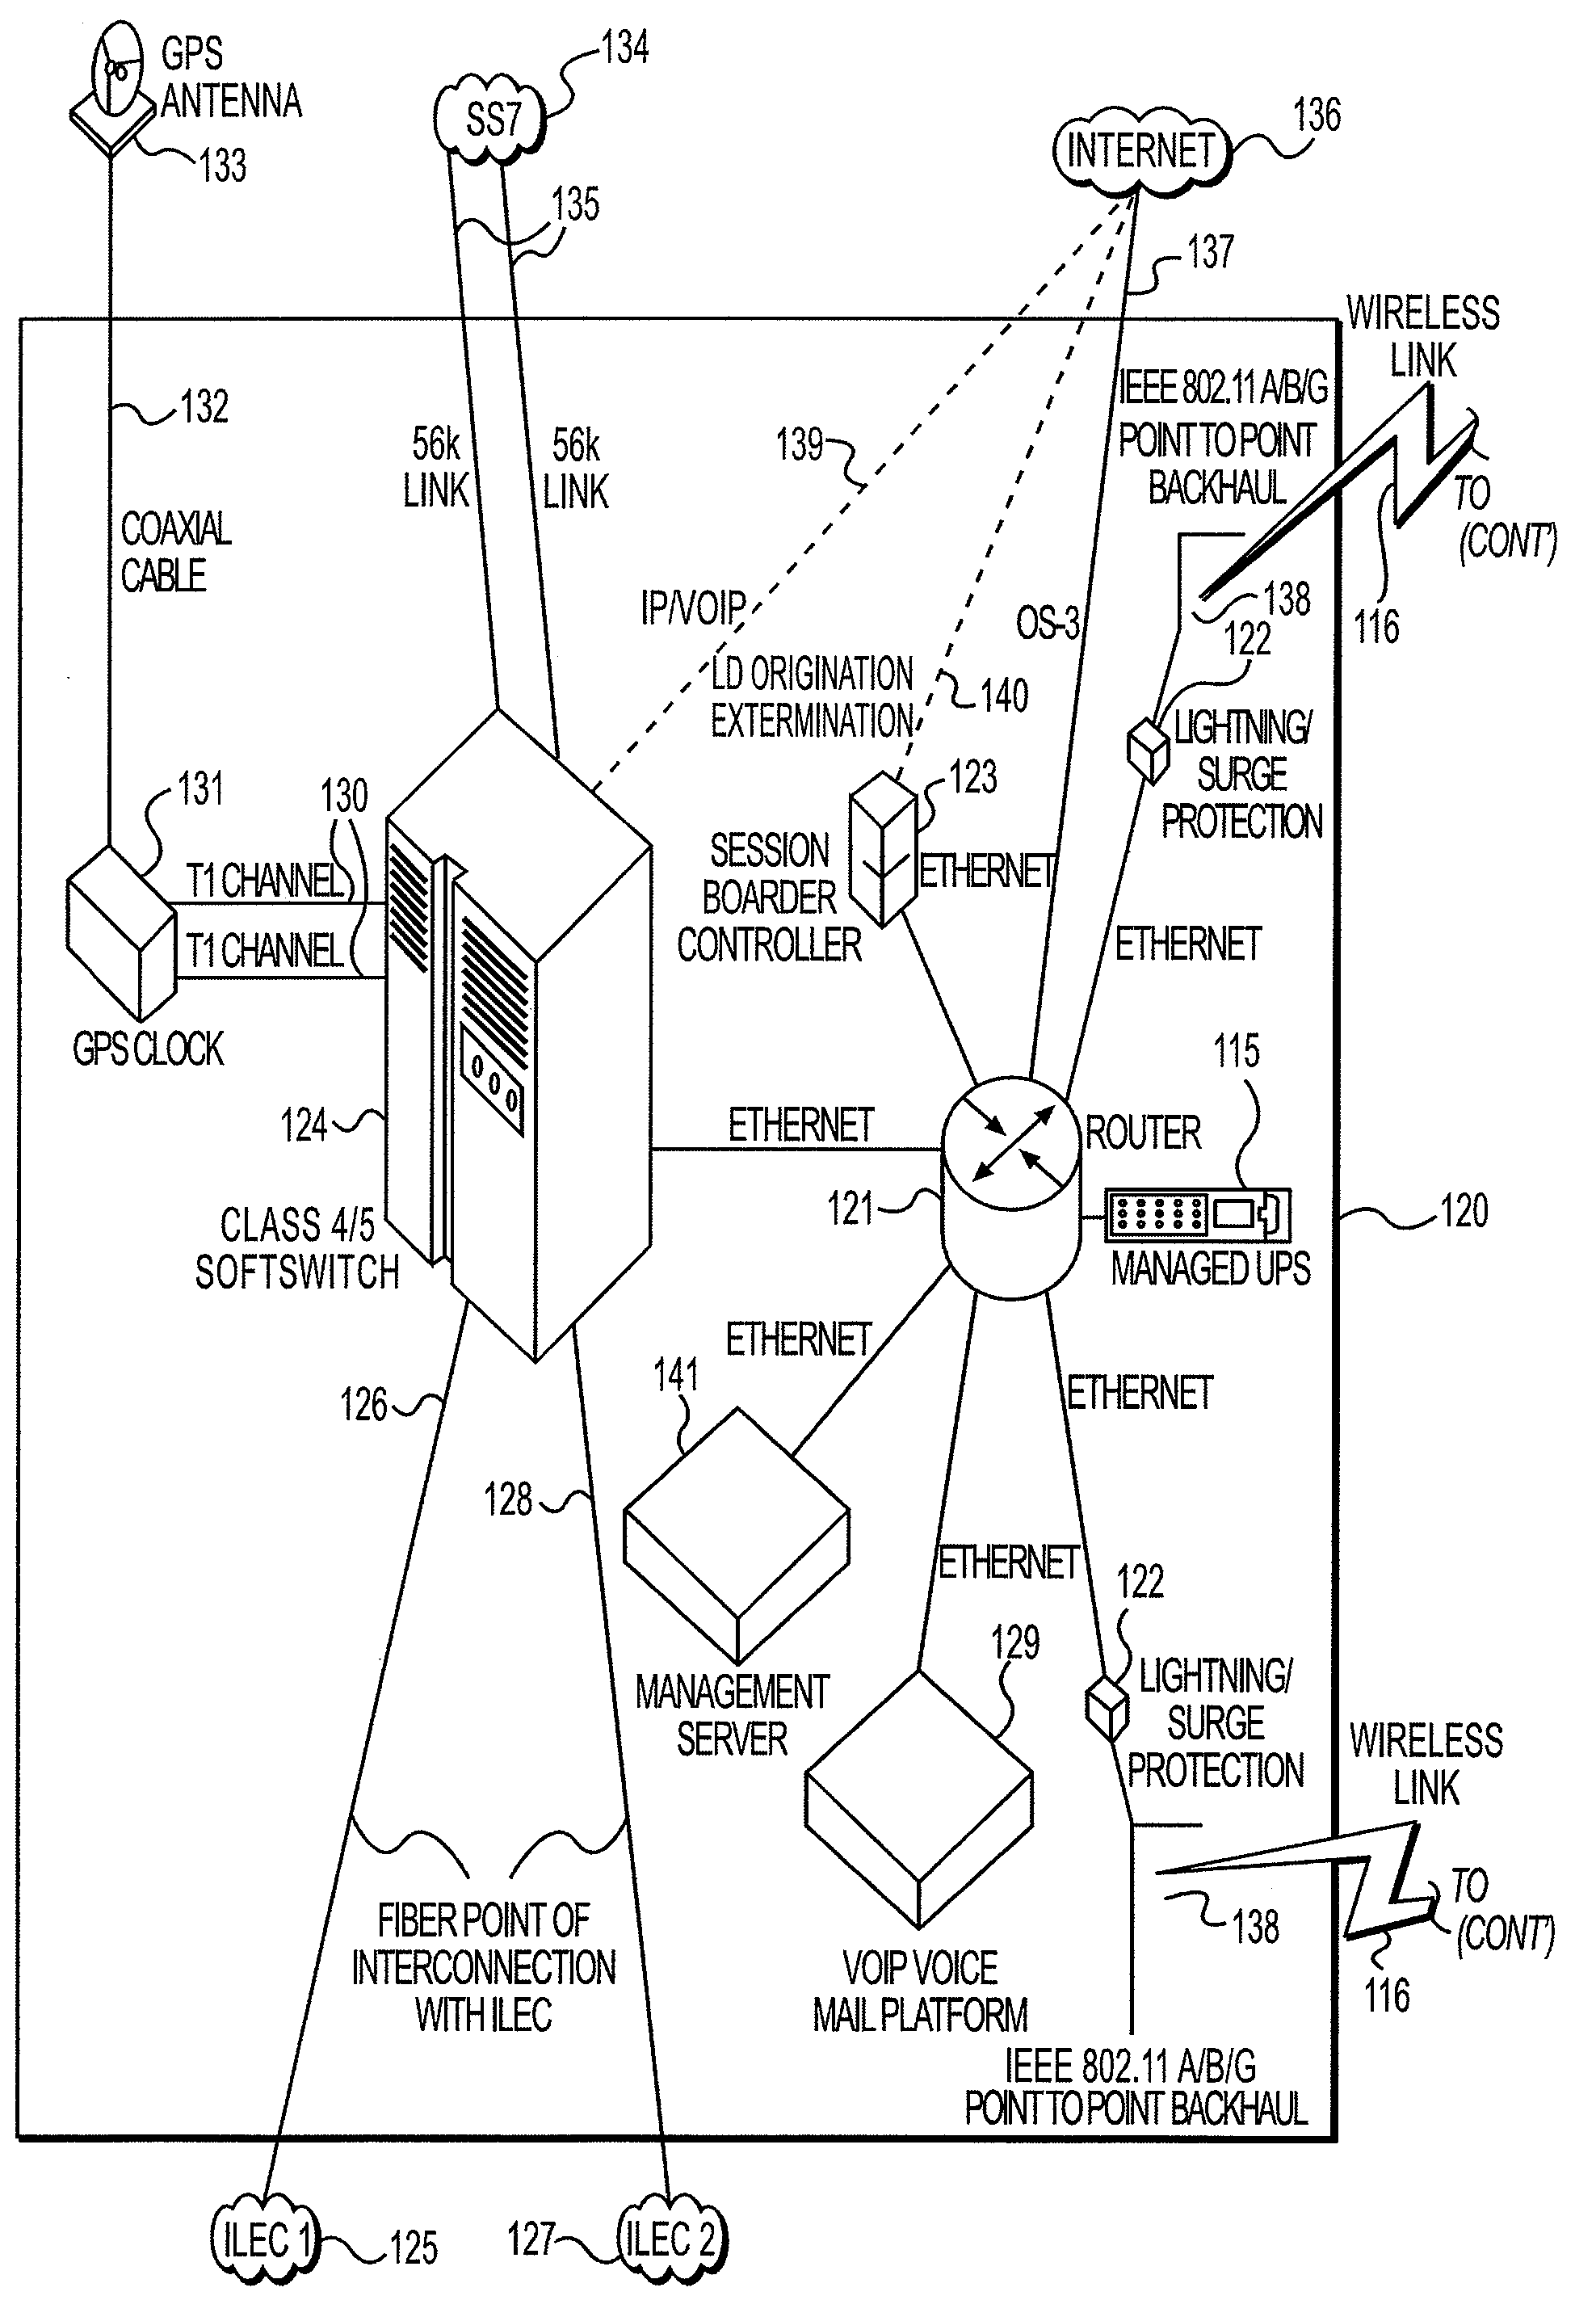 Apparatus and method for delivering public switched telephone network service and broadband internet access